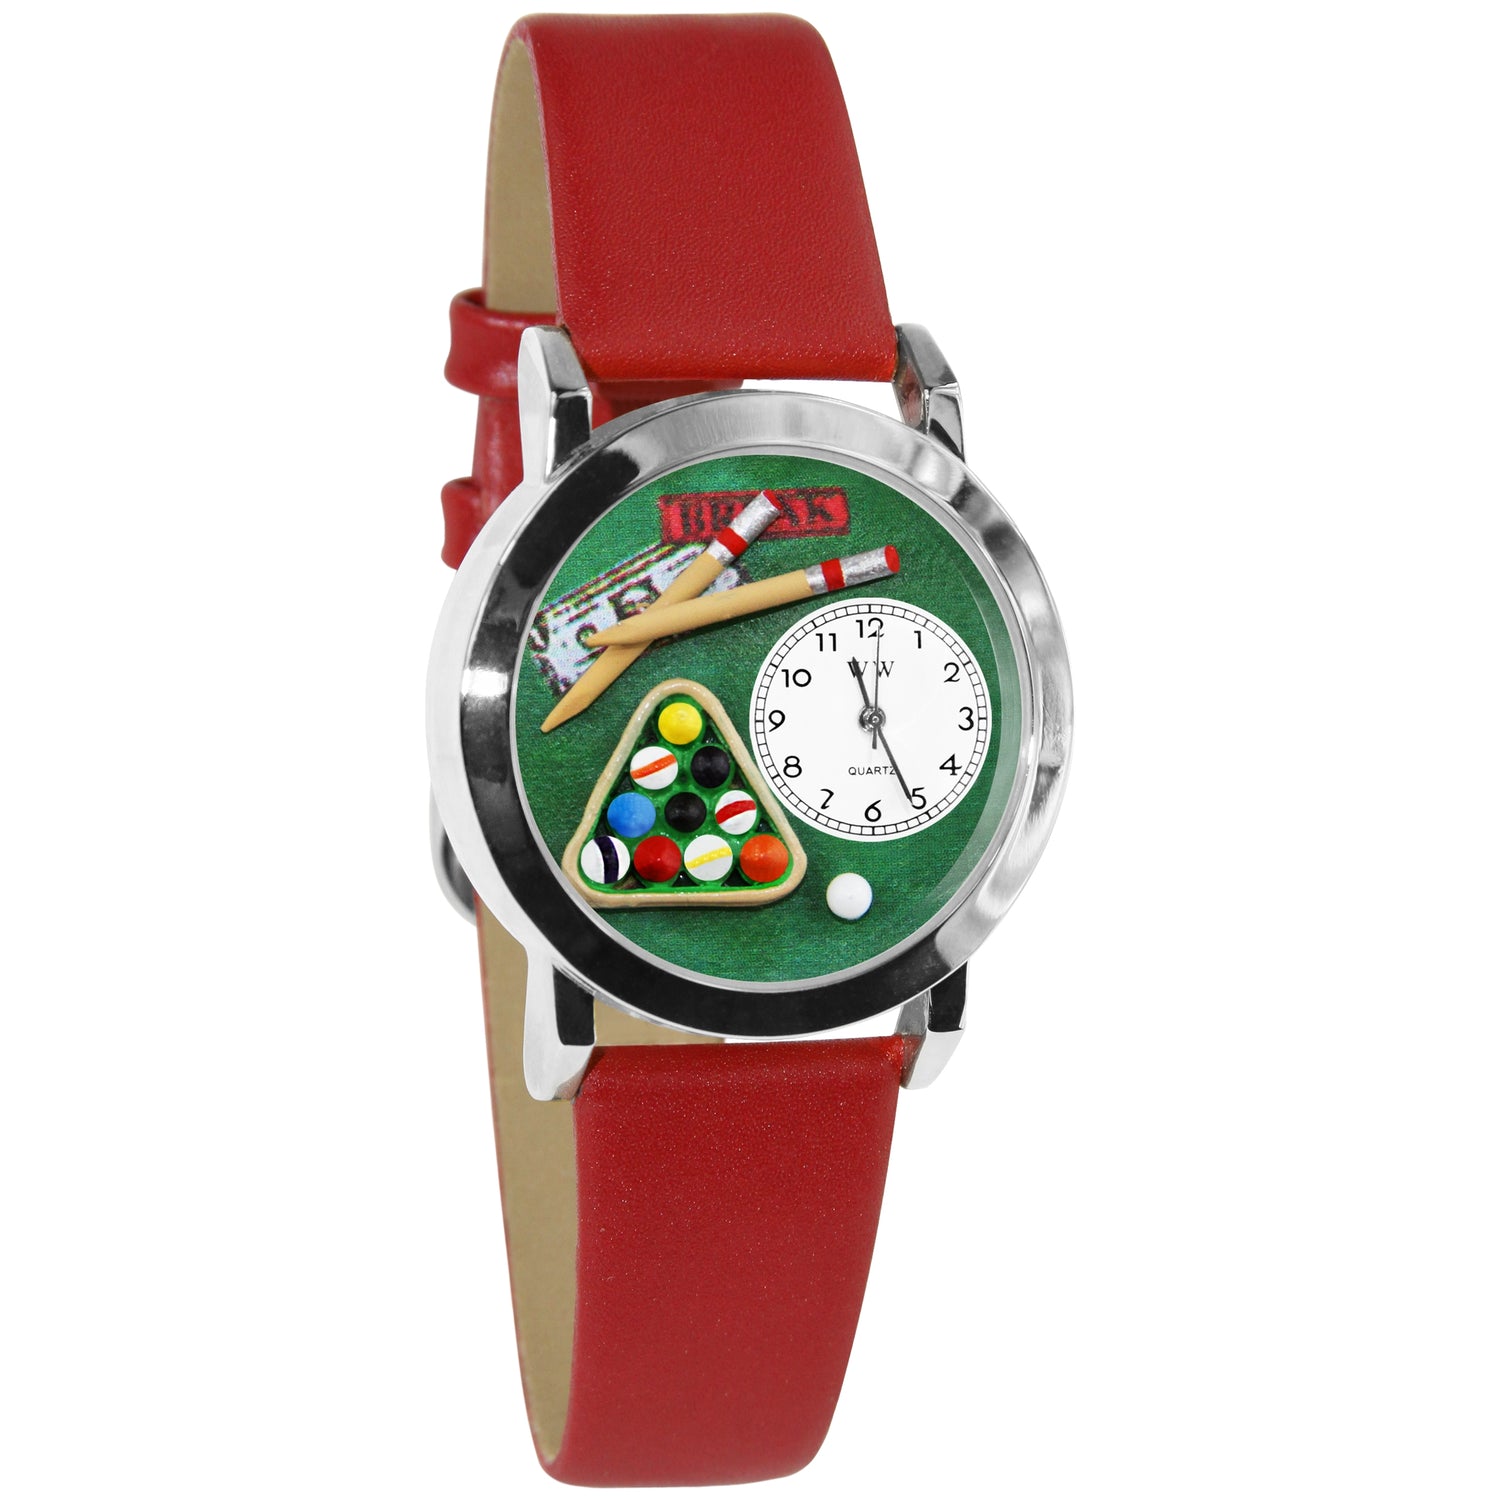 Whimsical Gifts | Billiards 3D Watch Small Style | Handmade in USA | Hobbies & Special Interests | Casino | Gaming | Game Night | Novelty Unique Fun Miniatures Gift | Silver Finish Red Leather Watch Band